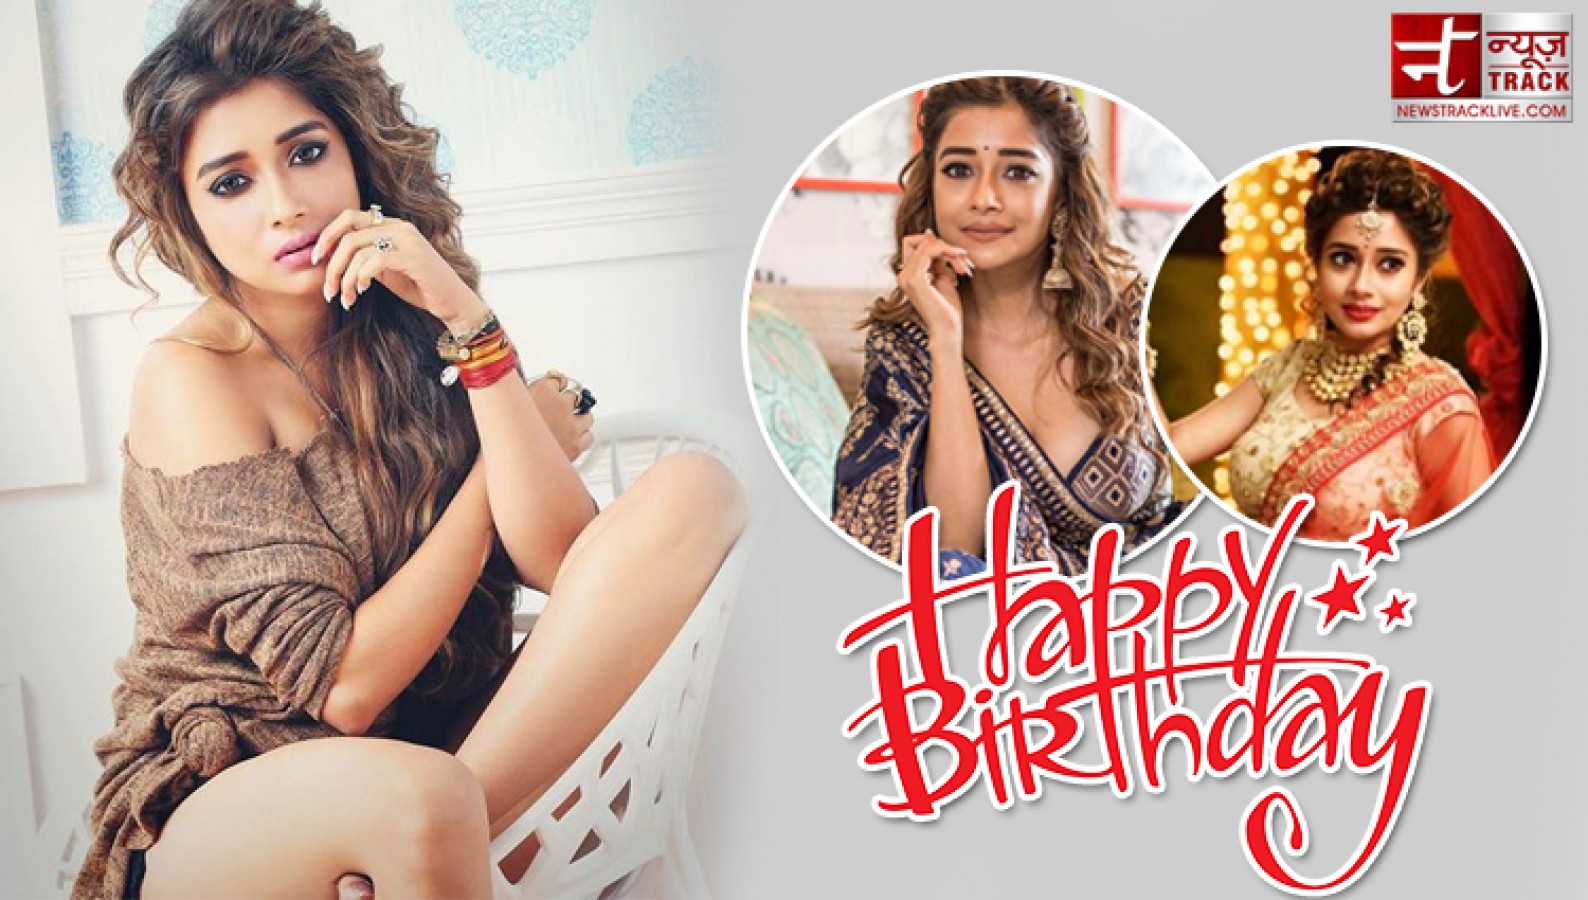 1588px x 900px - Birthday: Tina Dutta started her career at the age of 5 | NewsTrack English  5